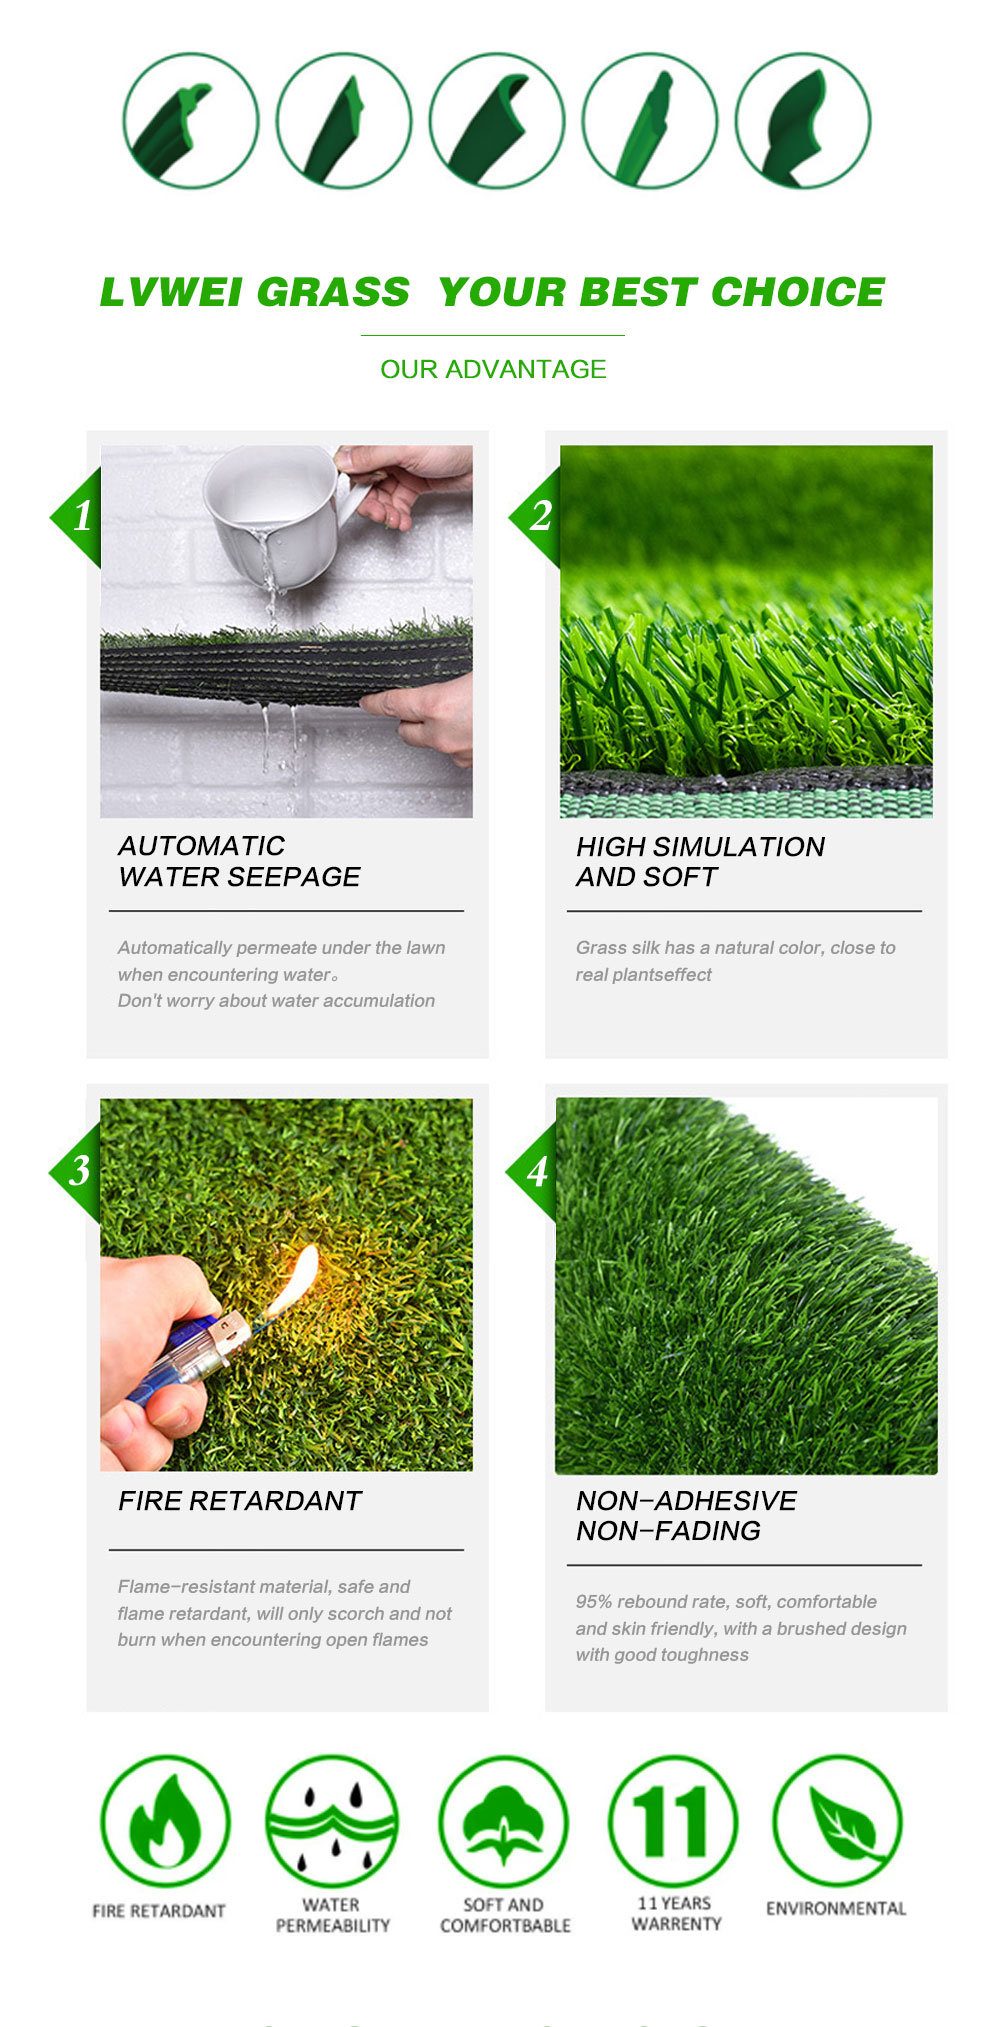 Yes PE Lw Plastic Woven Bags Grass Carpet Syntheic Turf